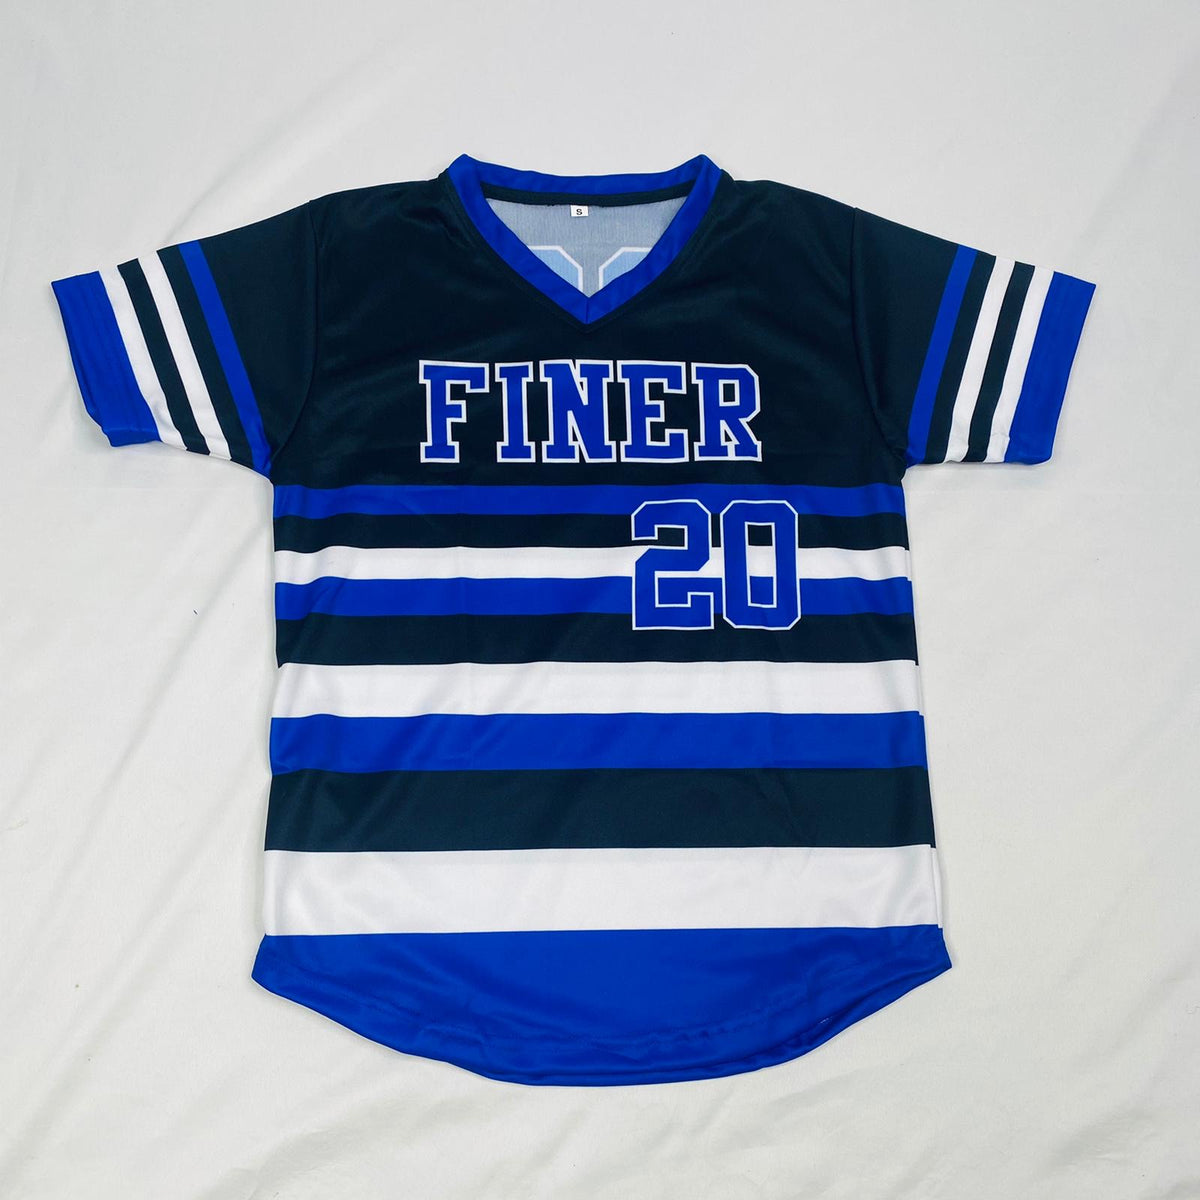 Delta Black Striped Baseball Jersey – The King McNeal Collection